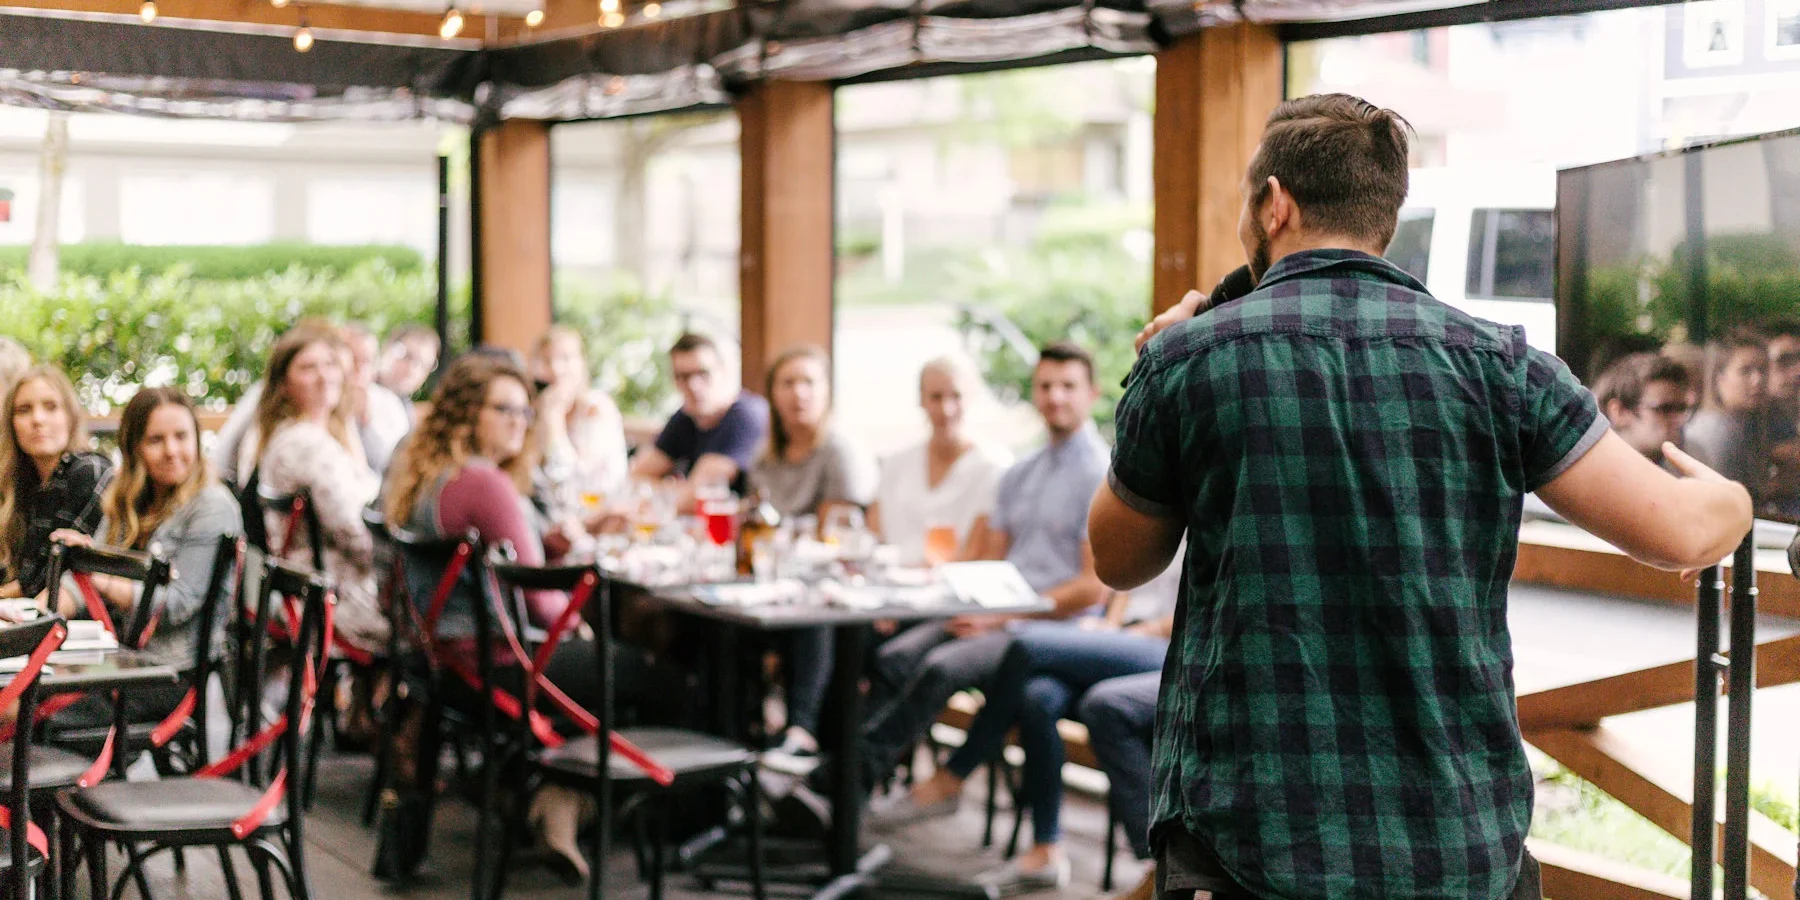 Top 5 tips for restaurant event promotions that work - Tableo